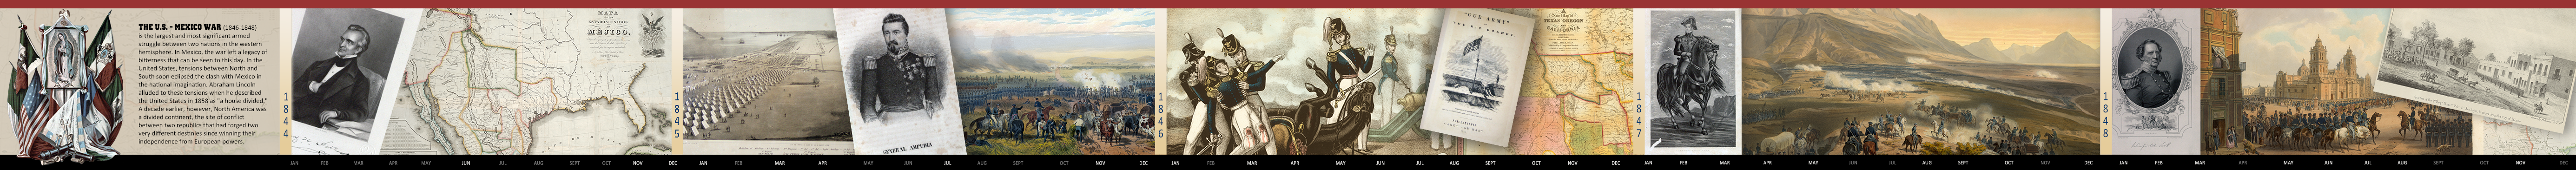 U.S. Mexico war timeline showing dates and events from 1844 to 1848